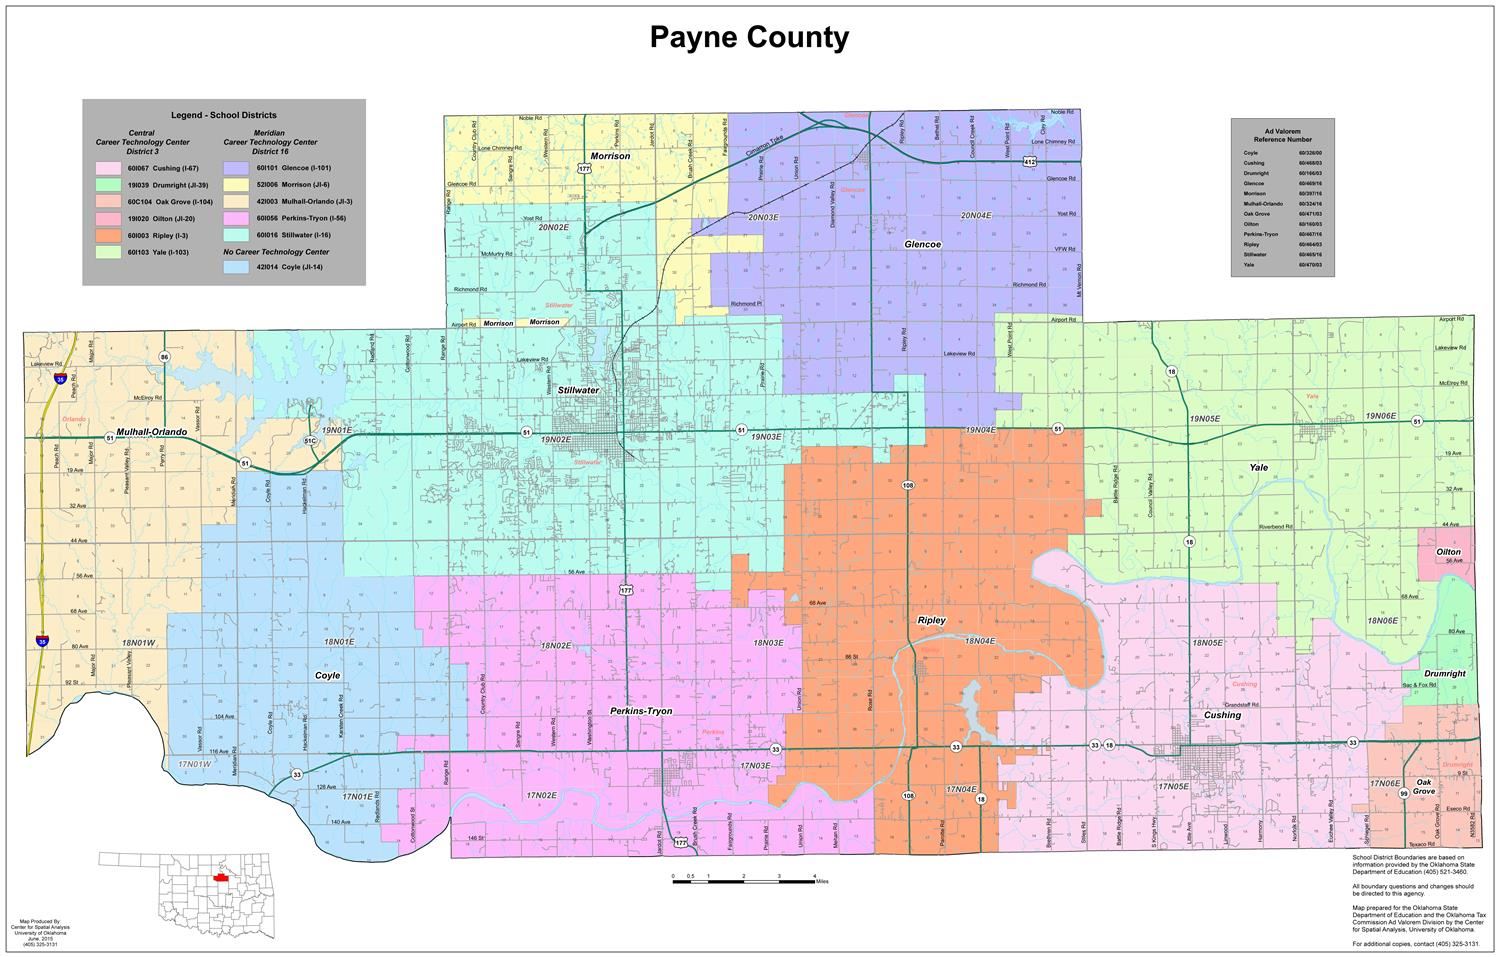 Payne County School Districts Map